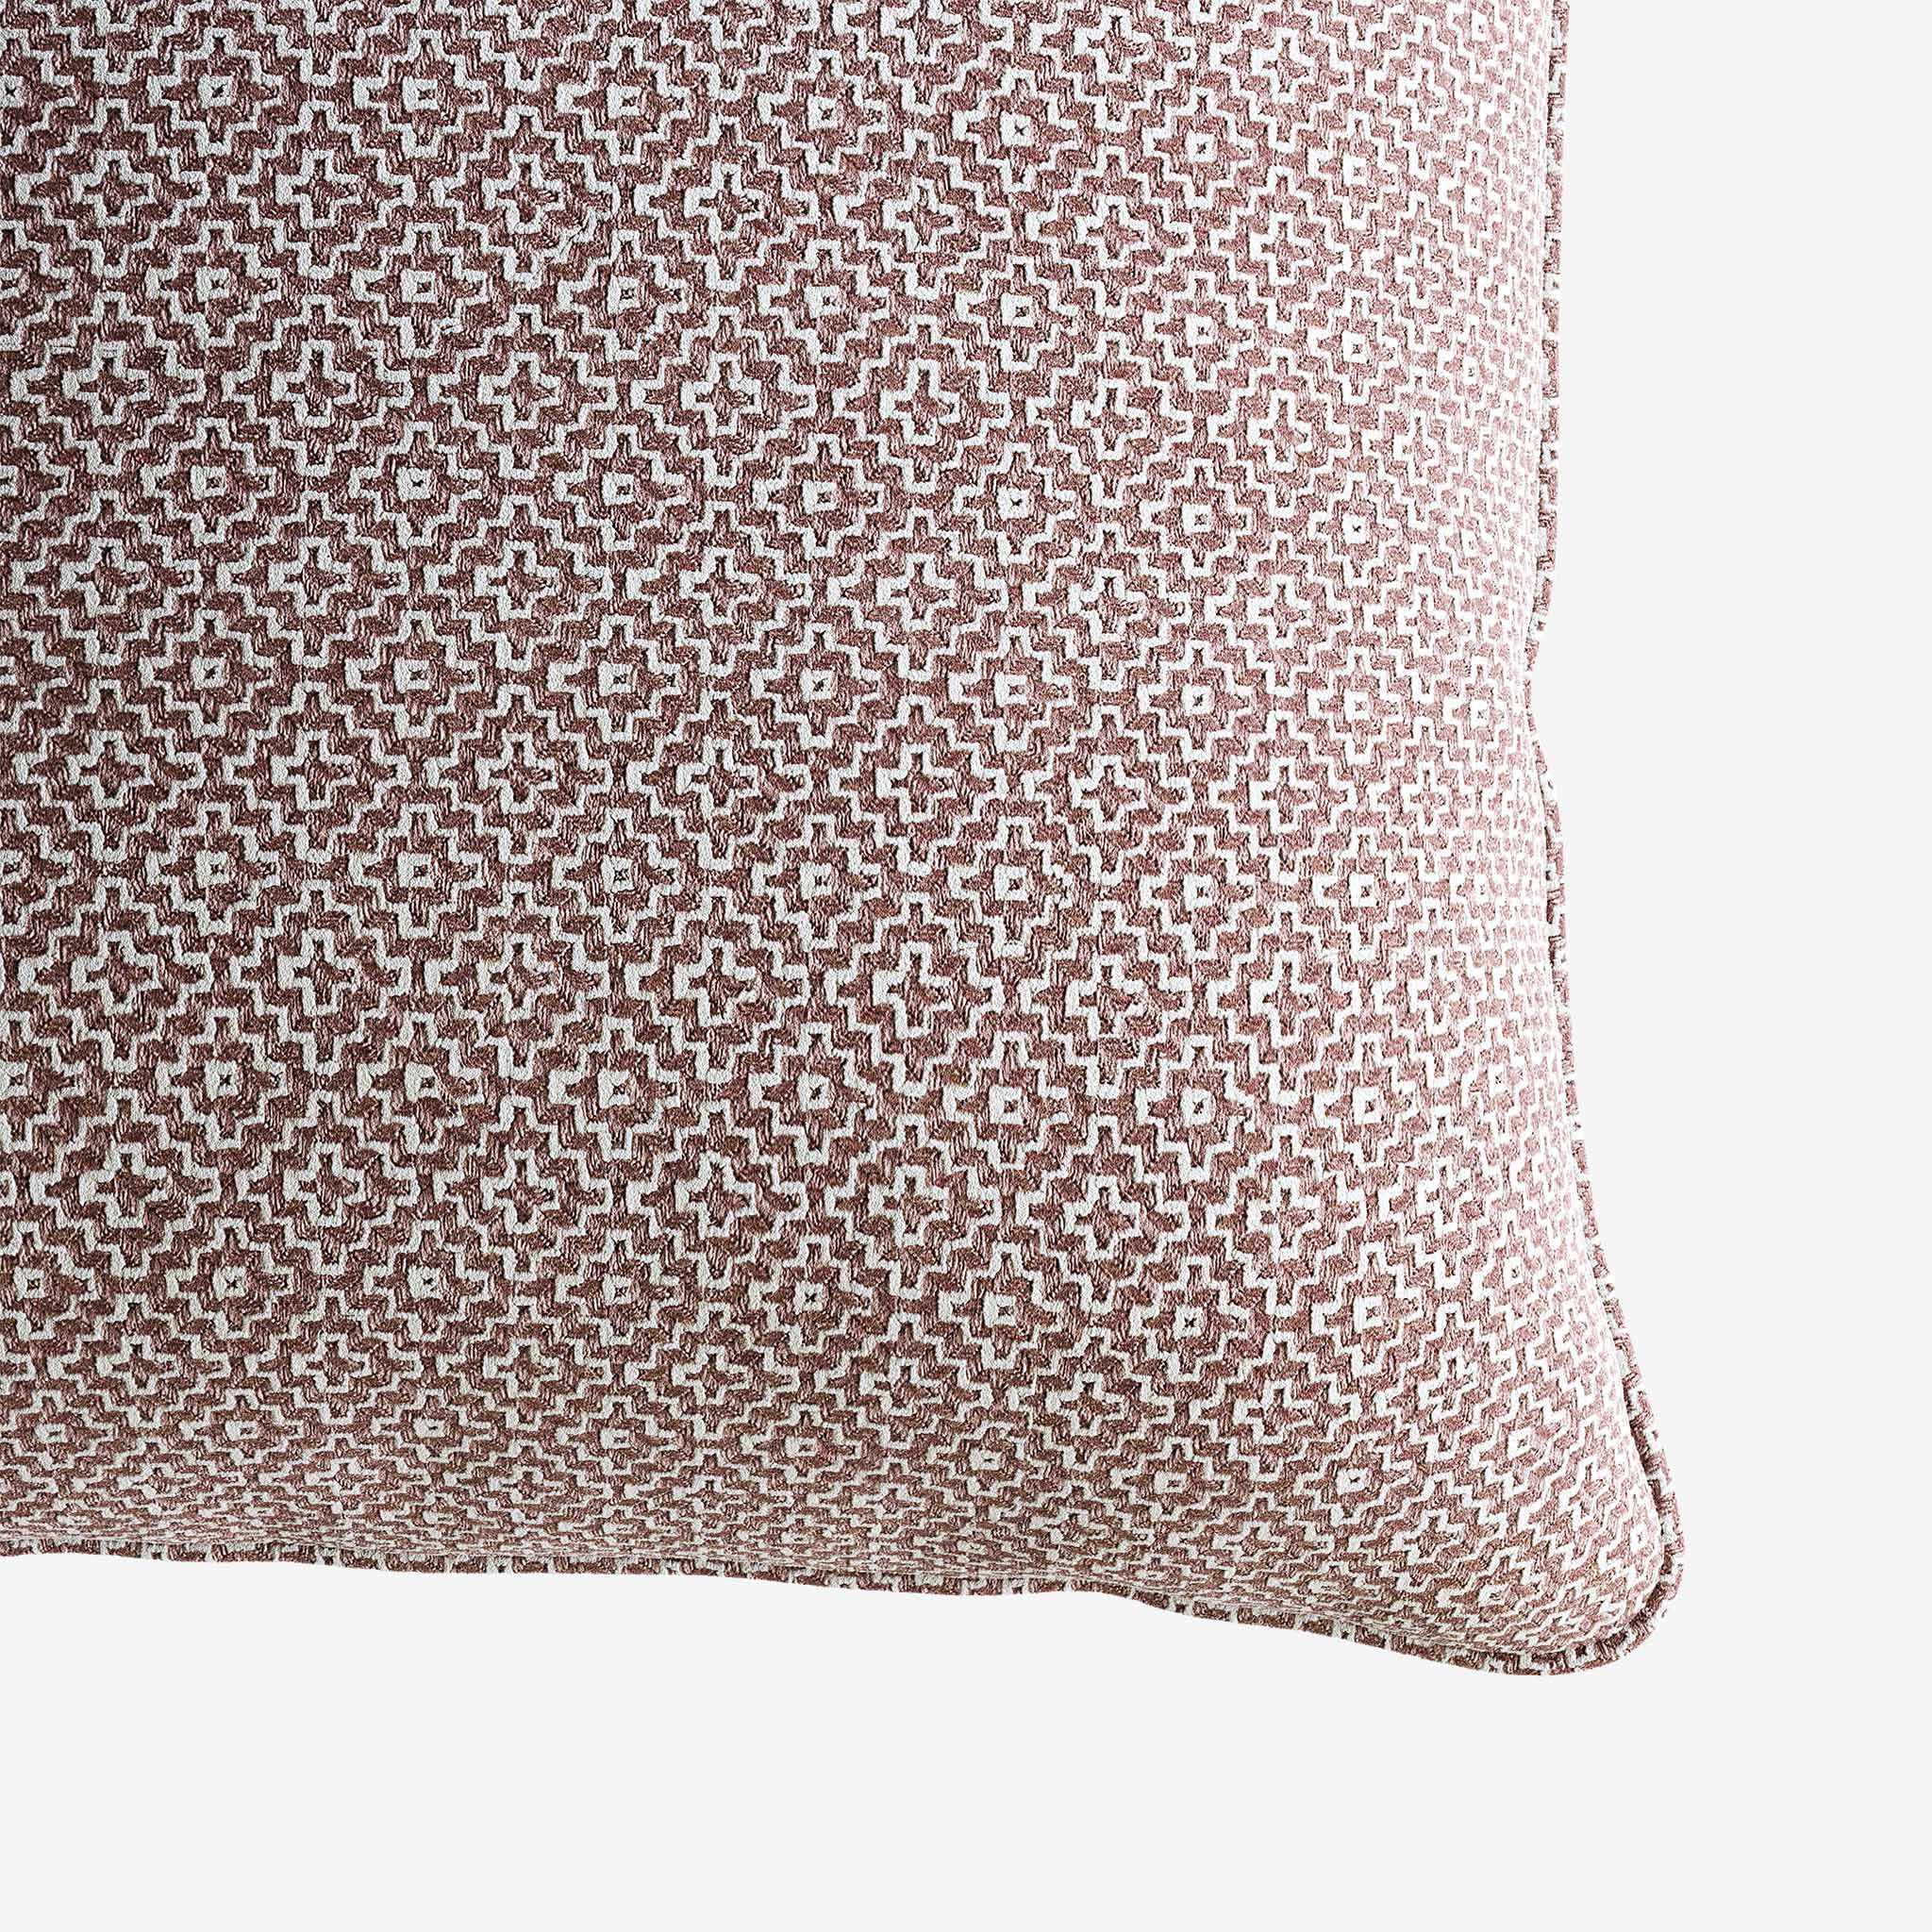 Luxury Cushion, pink Fabric, small-scale geometric pattern, Bedroom, Living Room